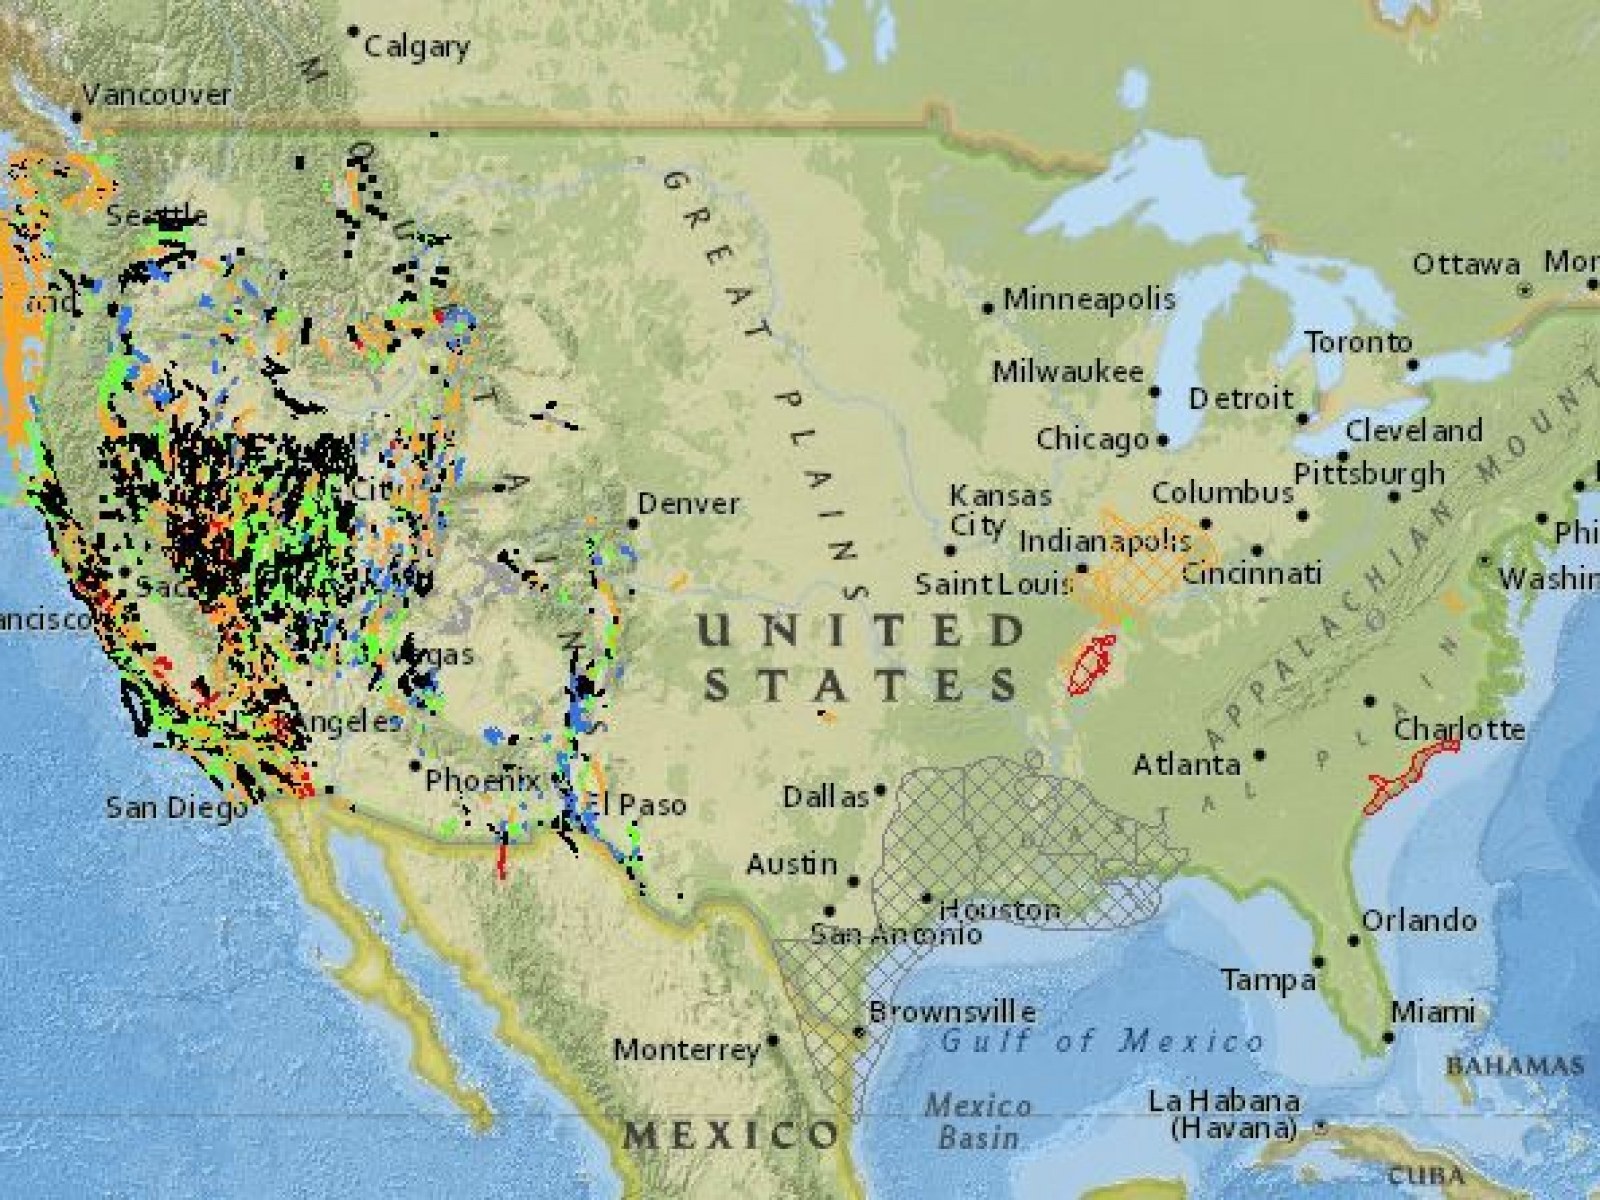 United States Fault Map Fault Line Map in United States: USGS Facts After Tennessee Earthquake